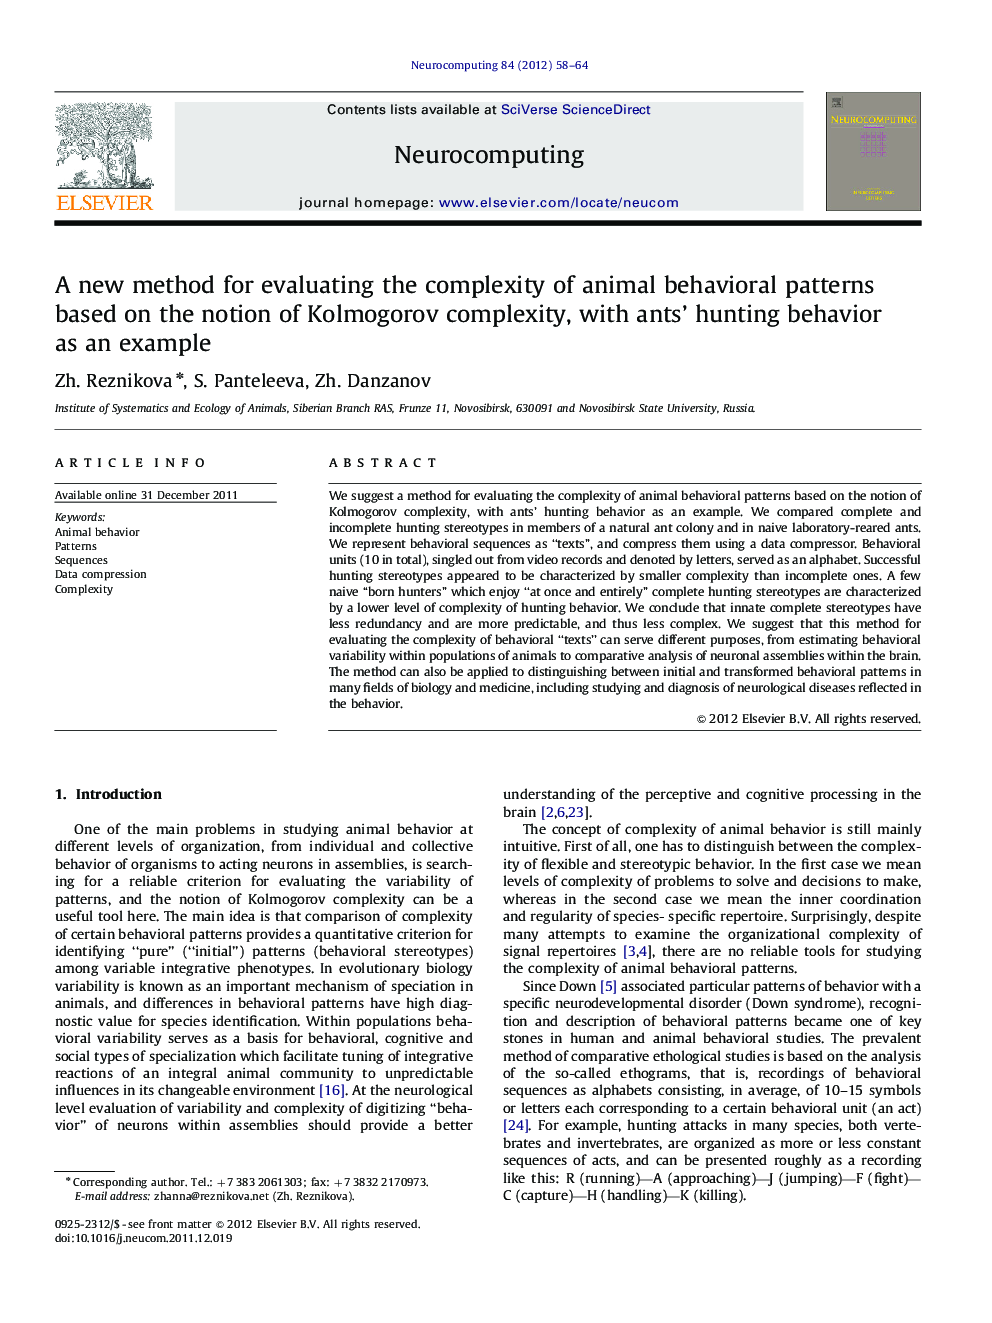 A new method for evaluating the complexity of animal behavioral patterns based on the notion of Kolmogorov complexity, with ants' hunting behavior as an example